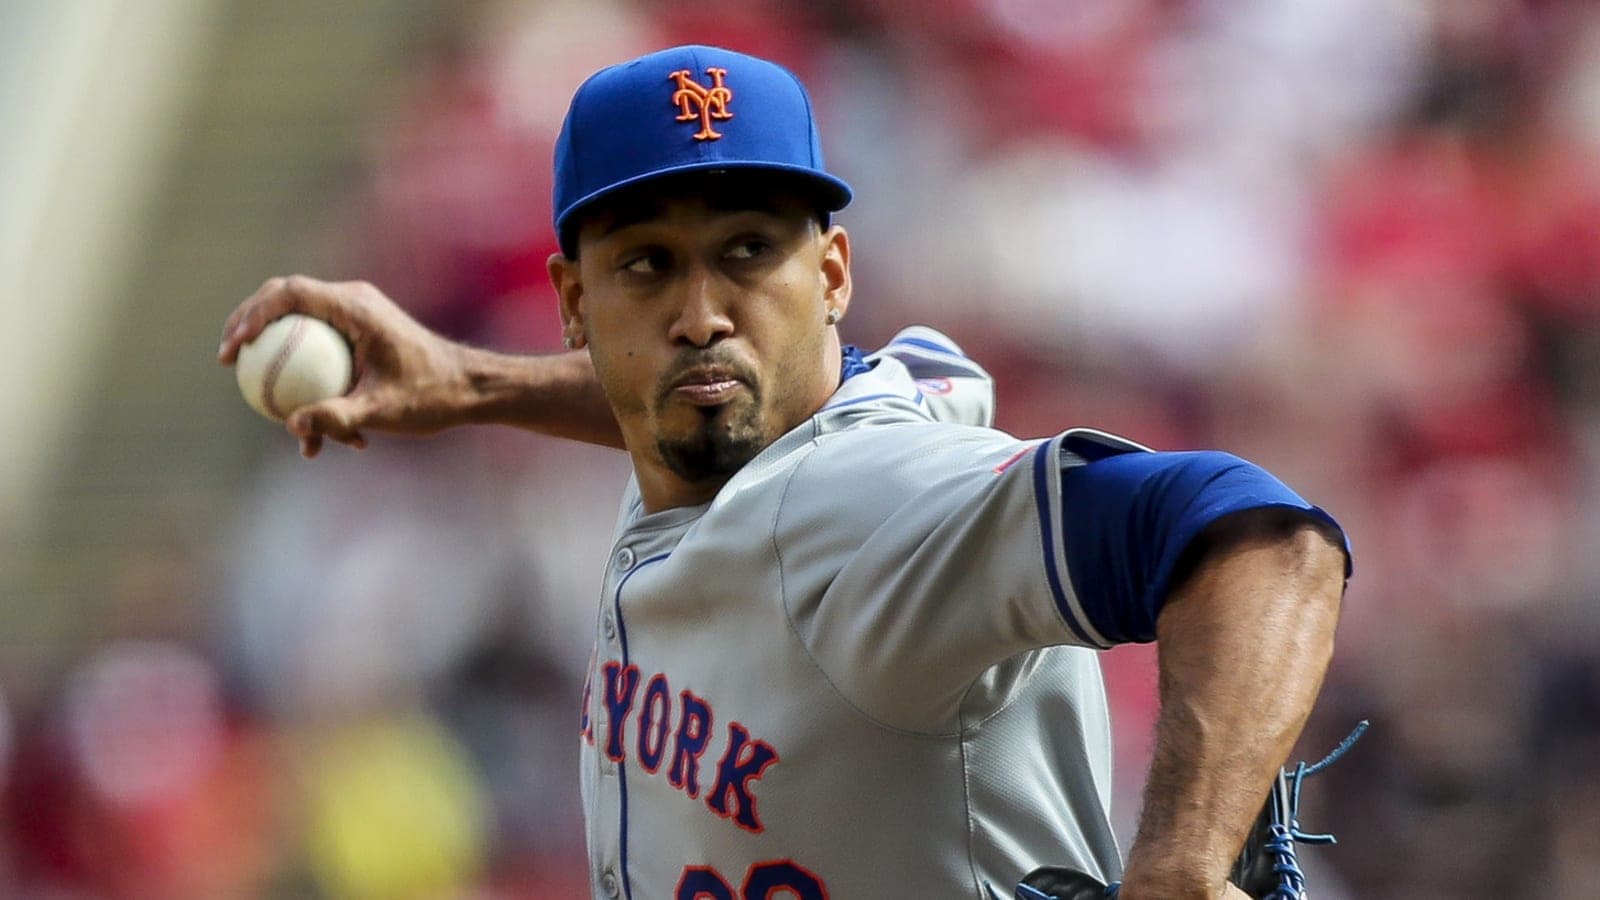 Edwin Díaz Ejected from Mets Game for Using Grip-Enhancing Substance